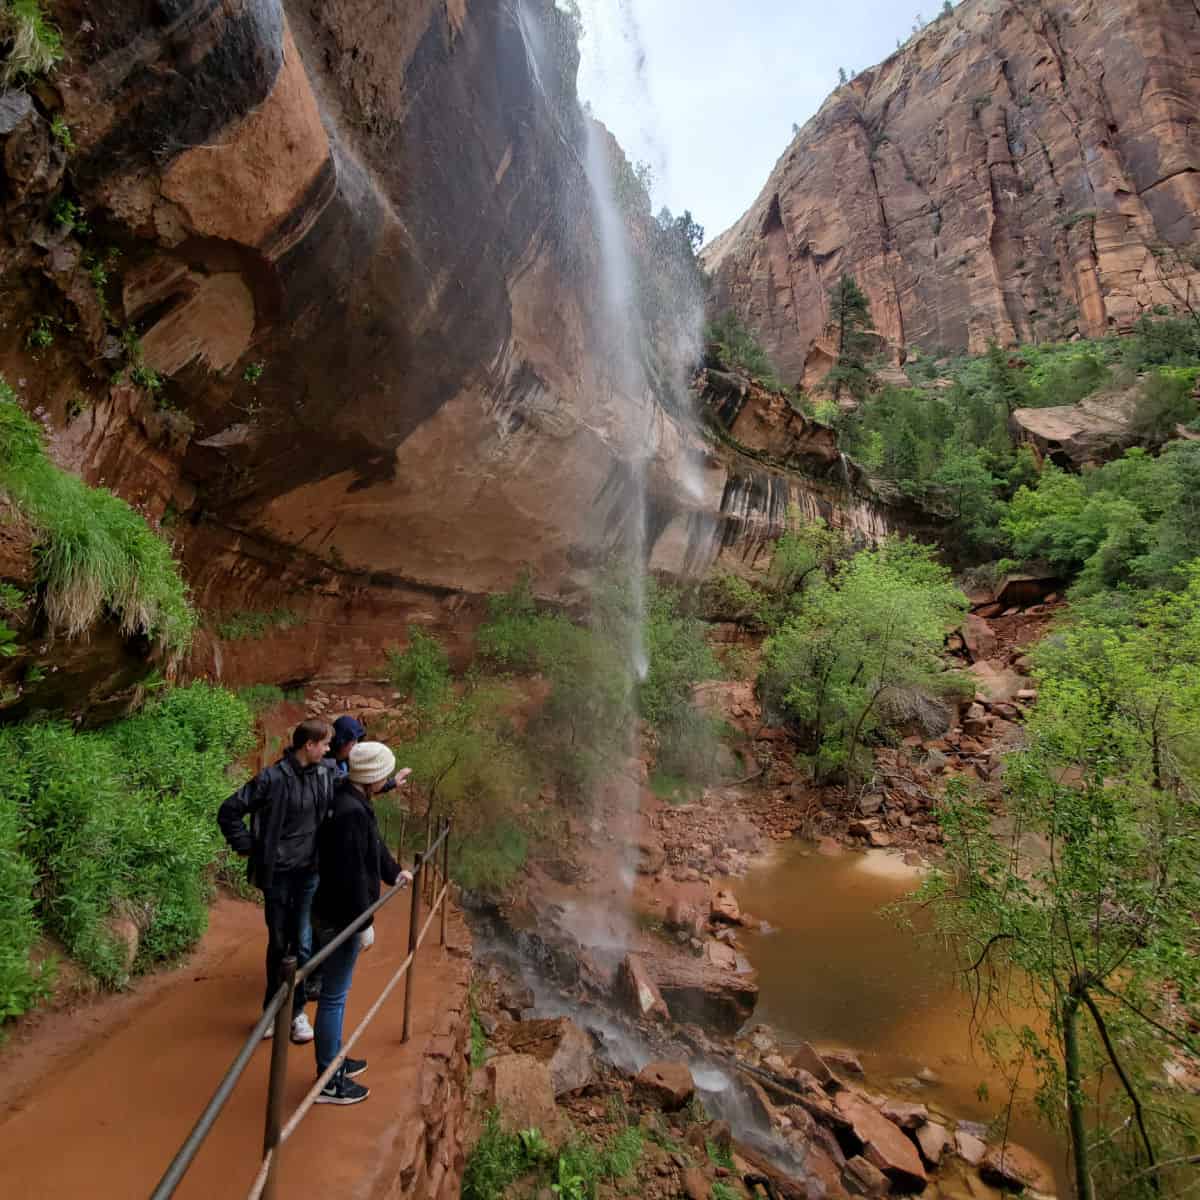 People pointing from trail with guard rail to a waterfall in red rocks